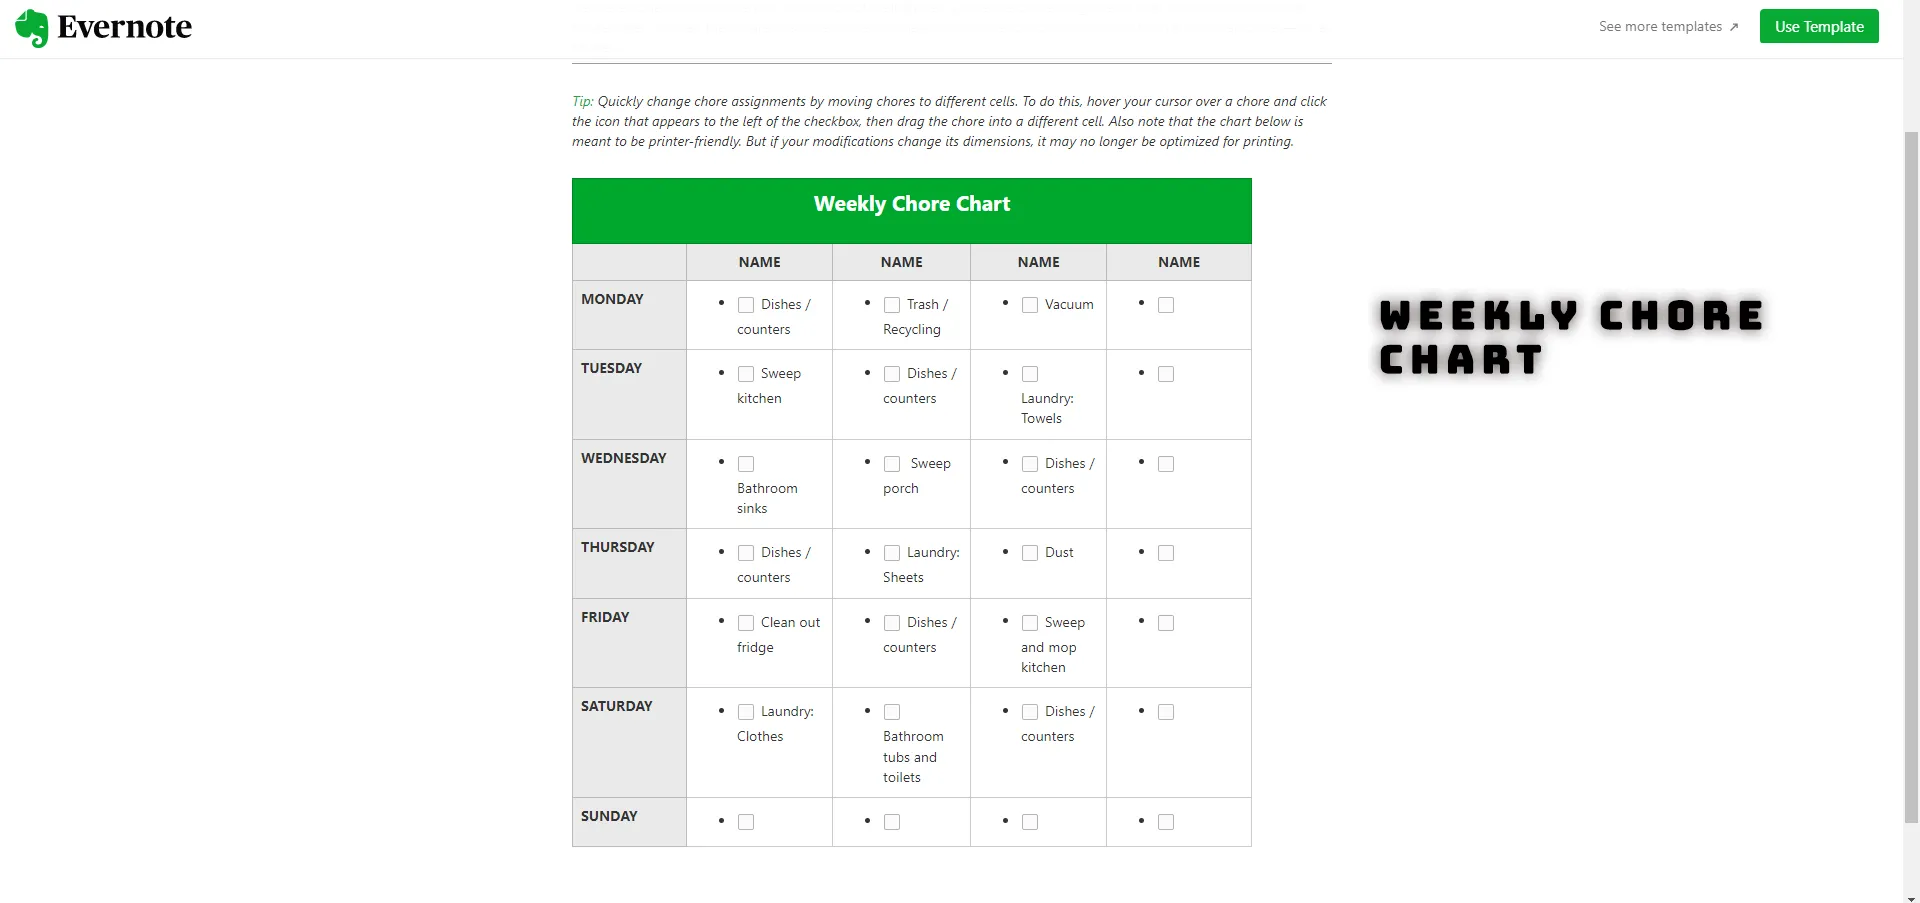 Weekly Chore Chart Template in Evernote